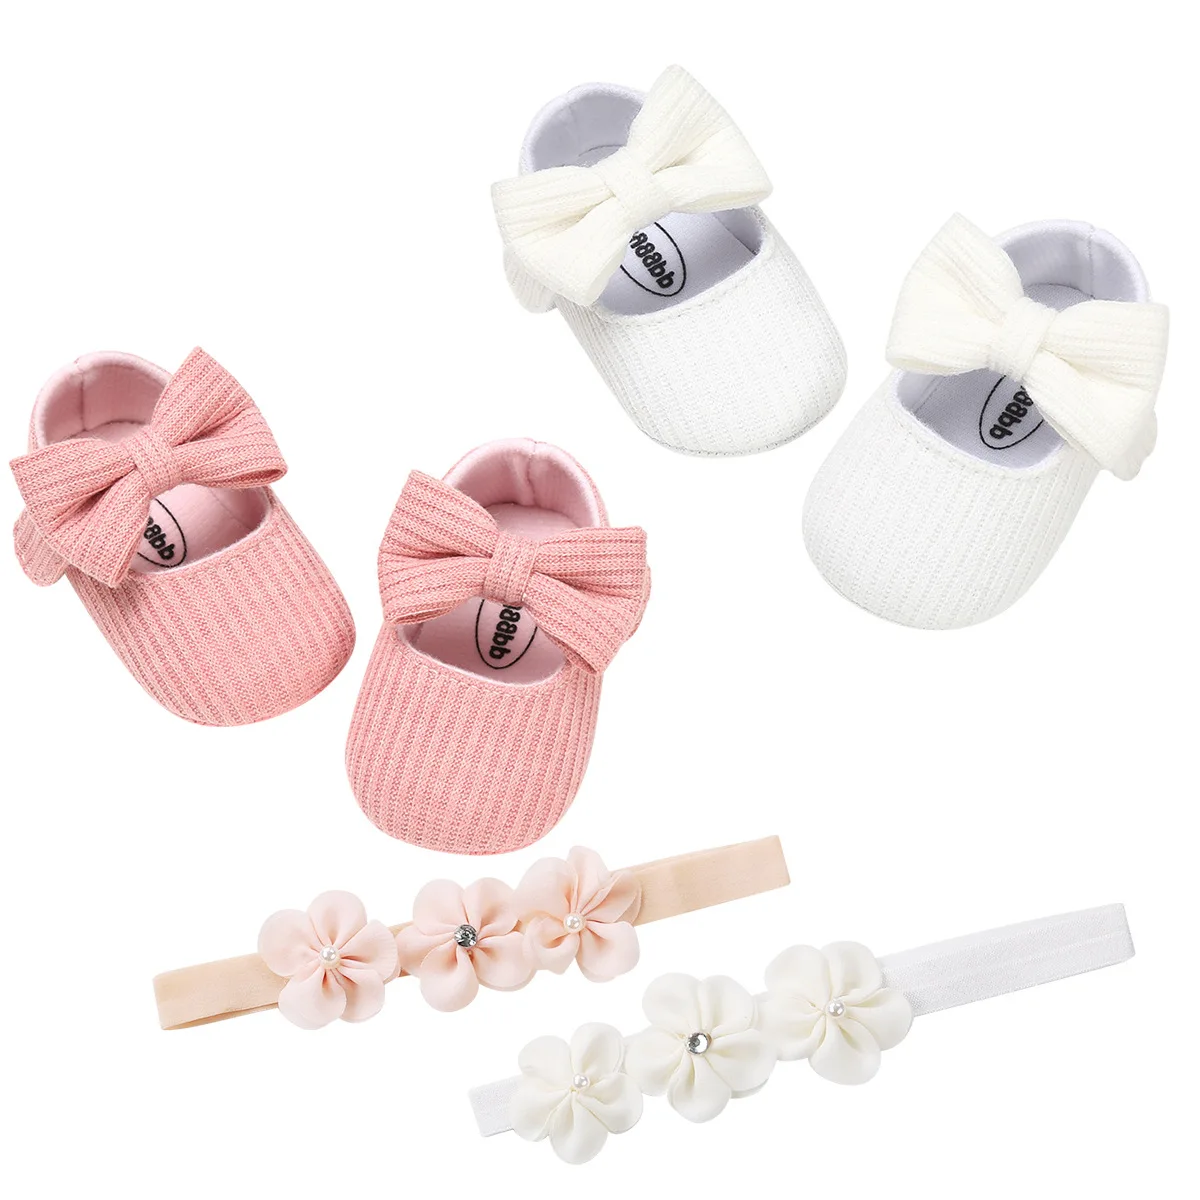 

Baby First Walkers Autumn Spring Baby Shoes Infant Pram Baby Girls Princess Moccasins Bowknot Solid Soft Shoes